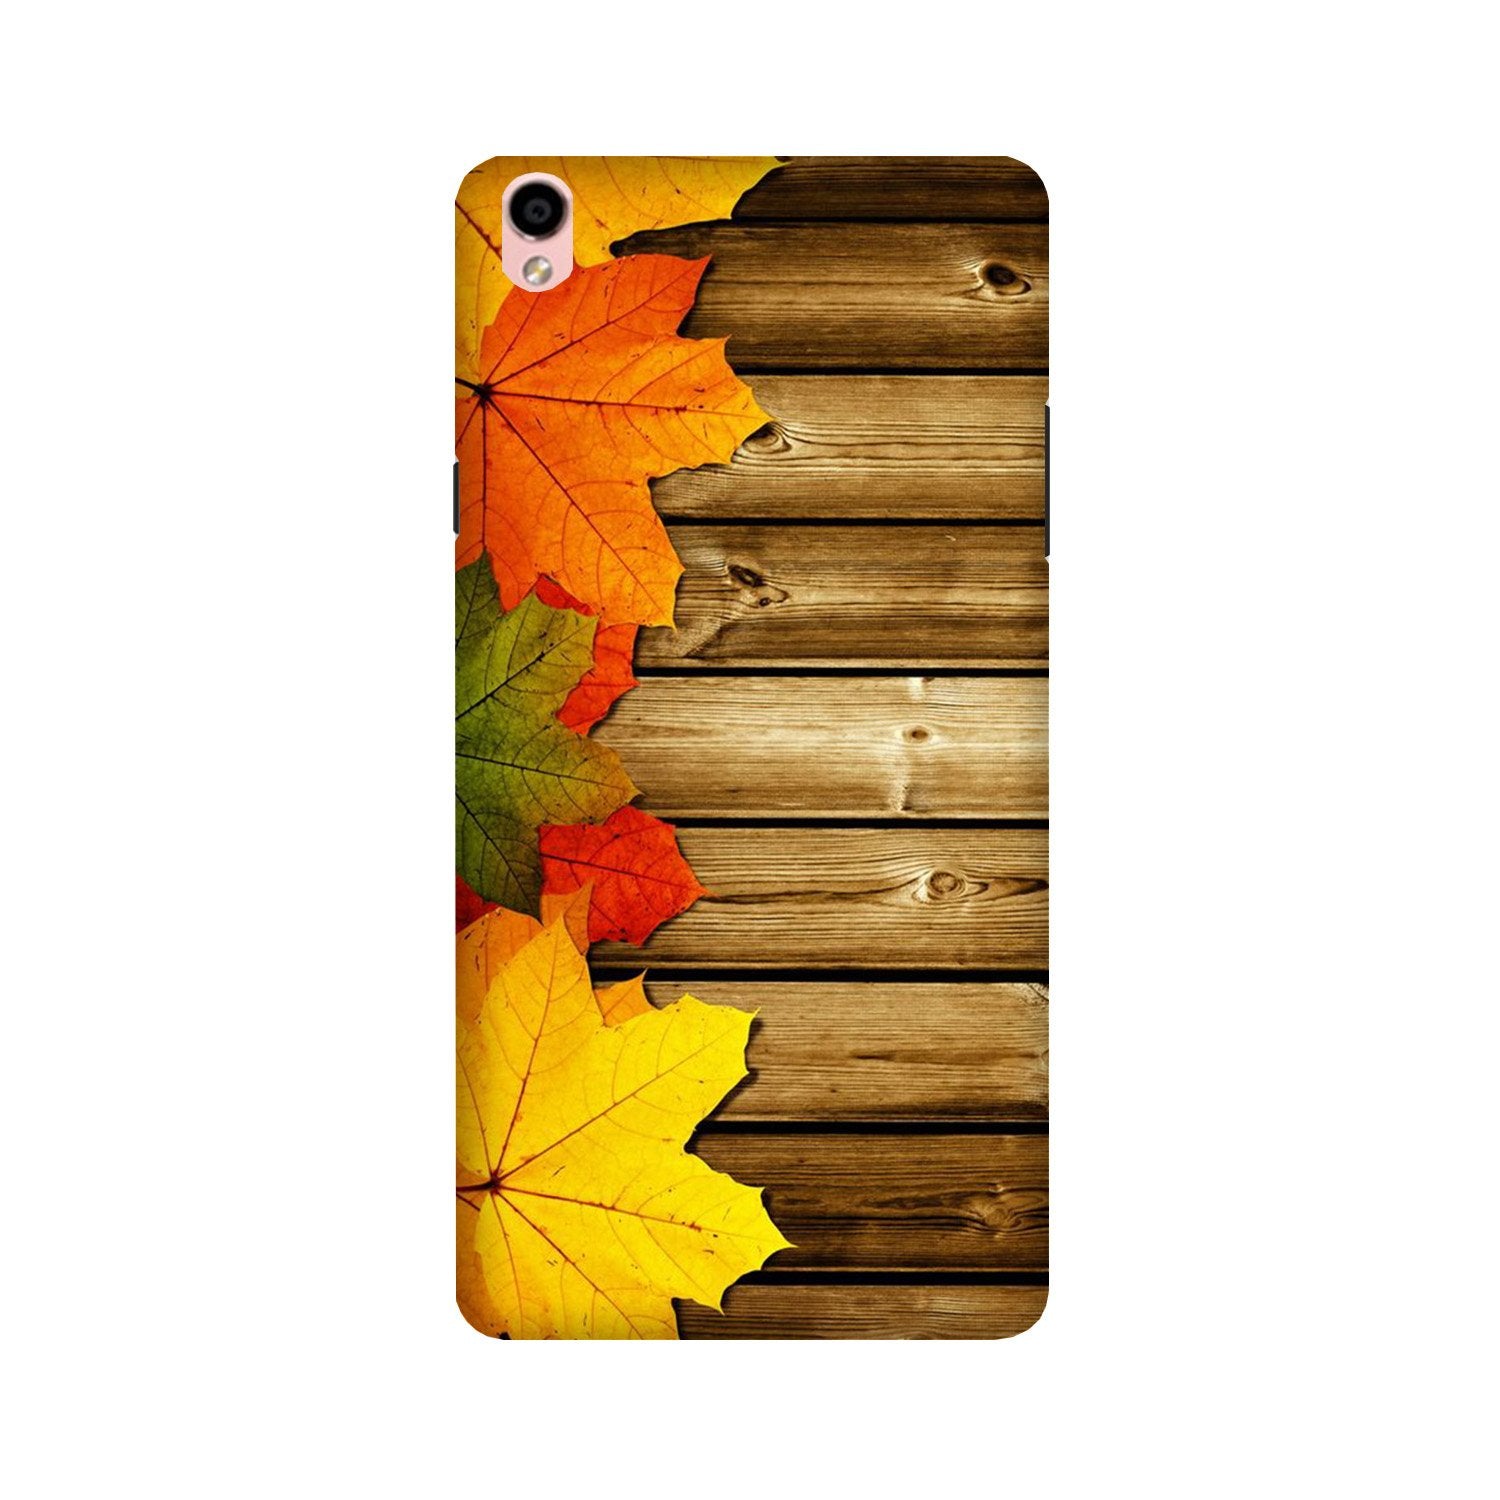 Wooden look3 Case for Oppo F1 Plus